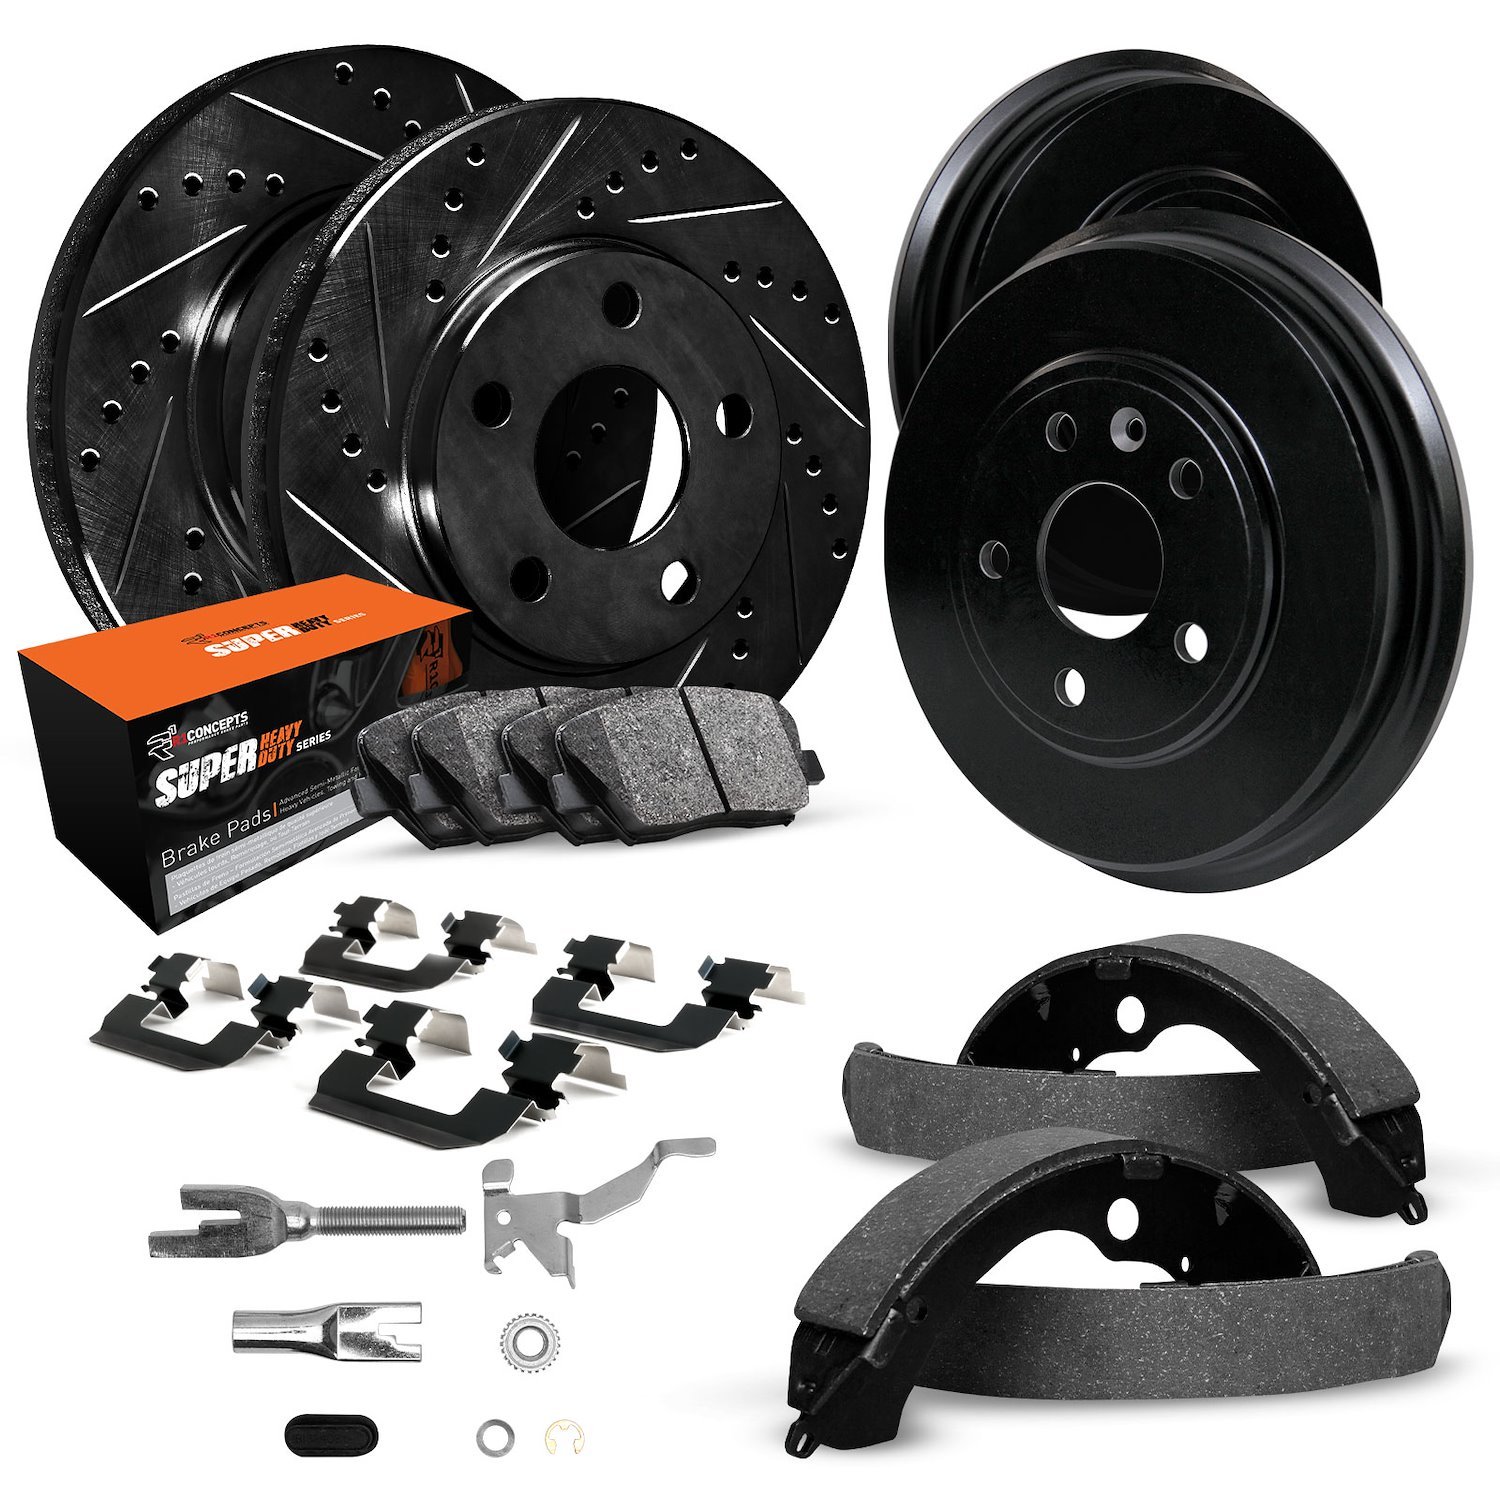 E-Line Slotted Black Brake Rotor & Drum Set w/Super-Duty Pads, Shoes, Hardware/Adjusters, 1980-1989 Ford/Lincoln/Mercury/Mazda